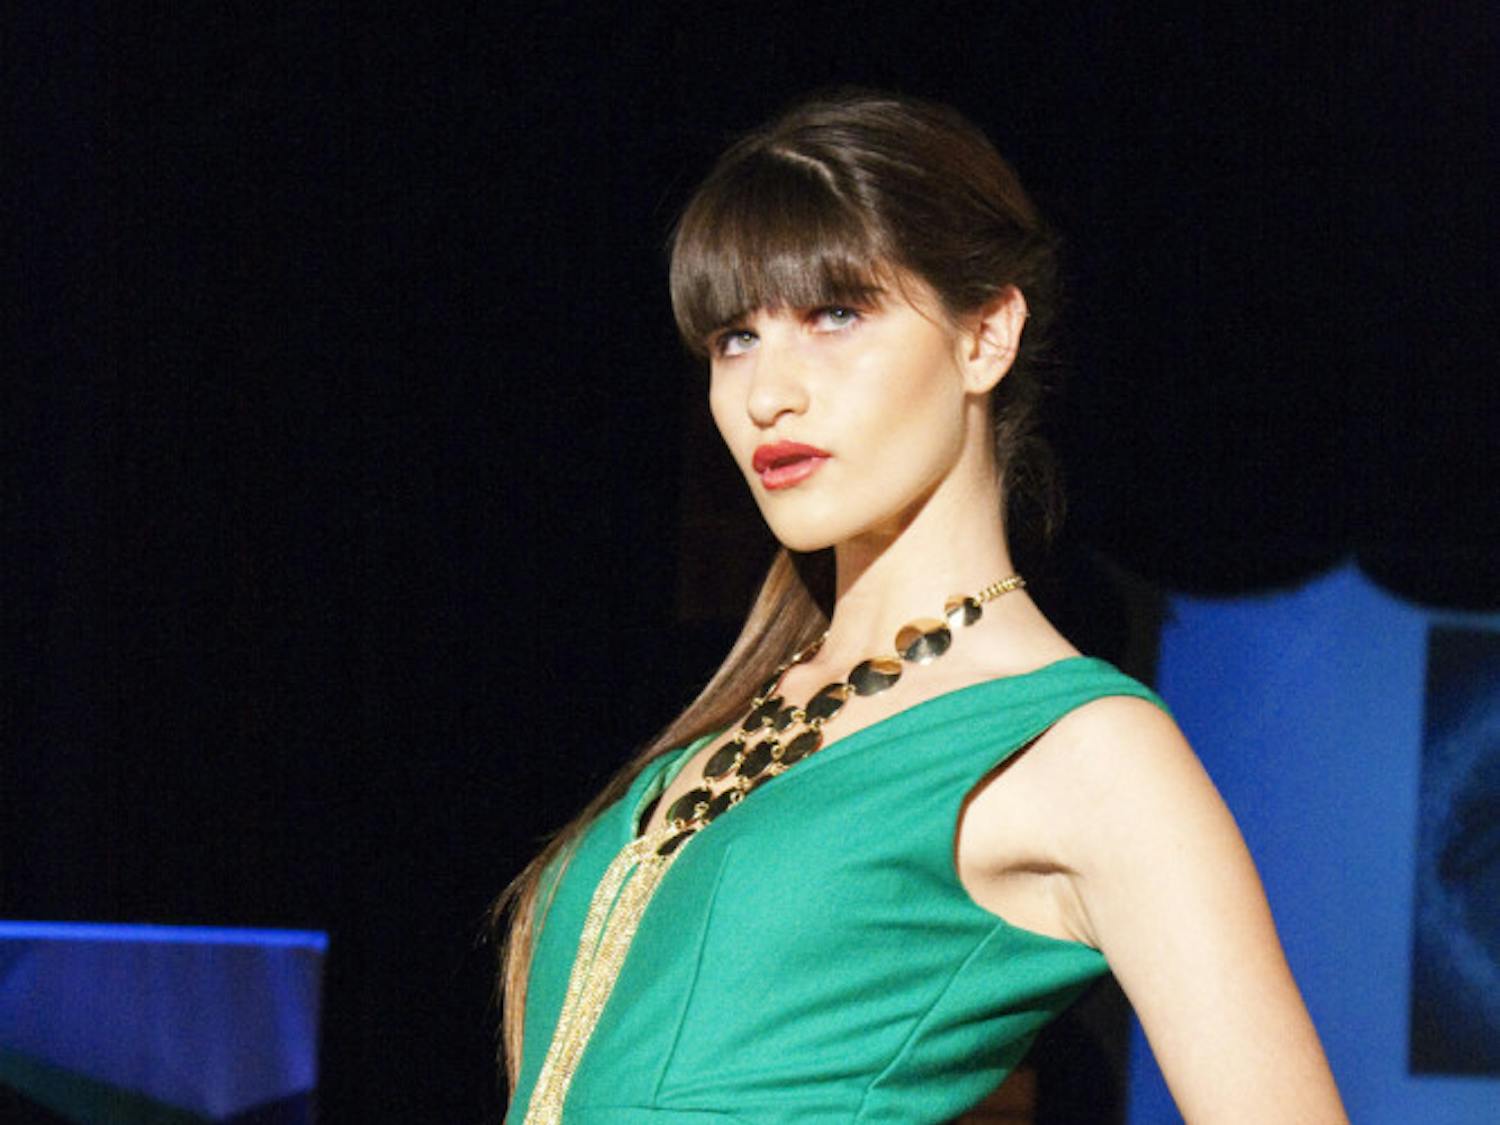 A model strikes a pose during the runway shows on Saturday night as part of Gainesville Fashion Week.